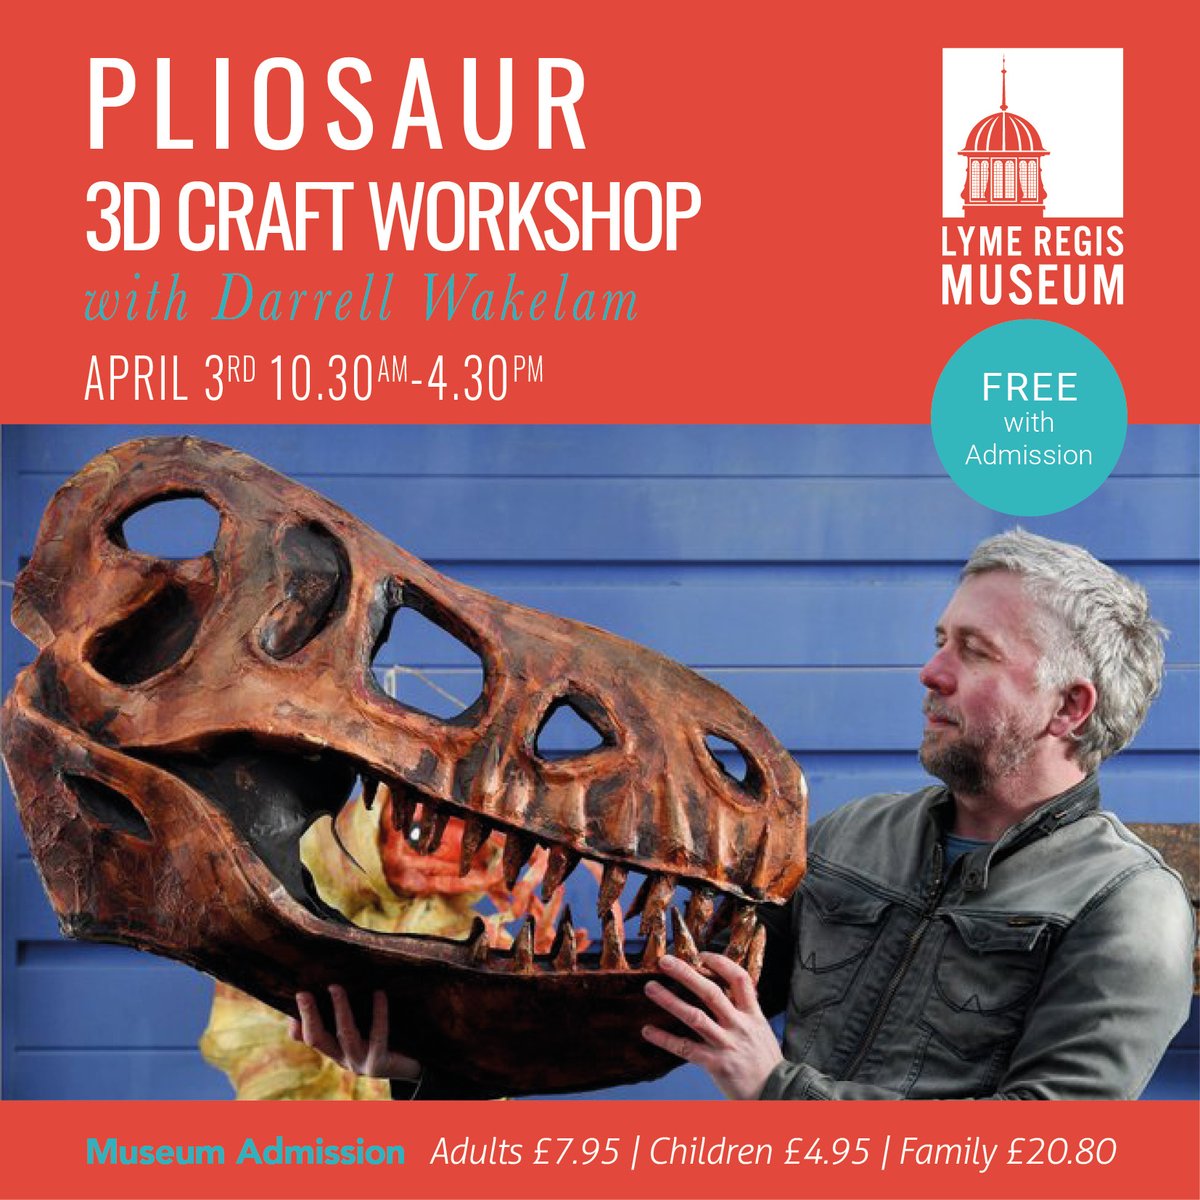 Looking for some Easter Holiday crafting fun? Join Cardboard King, @DarrellWakelam, in his drop-in session at the Museum on 3rd April, 3D modelling giant pliosaur jaws! Be part of this collaborative piece of art which will take shape over the course of the day. All ages welcome!